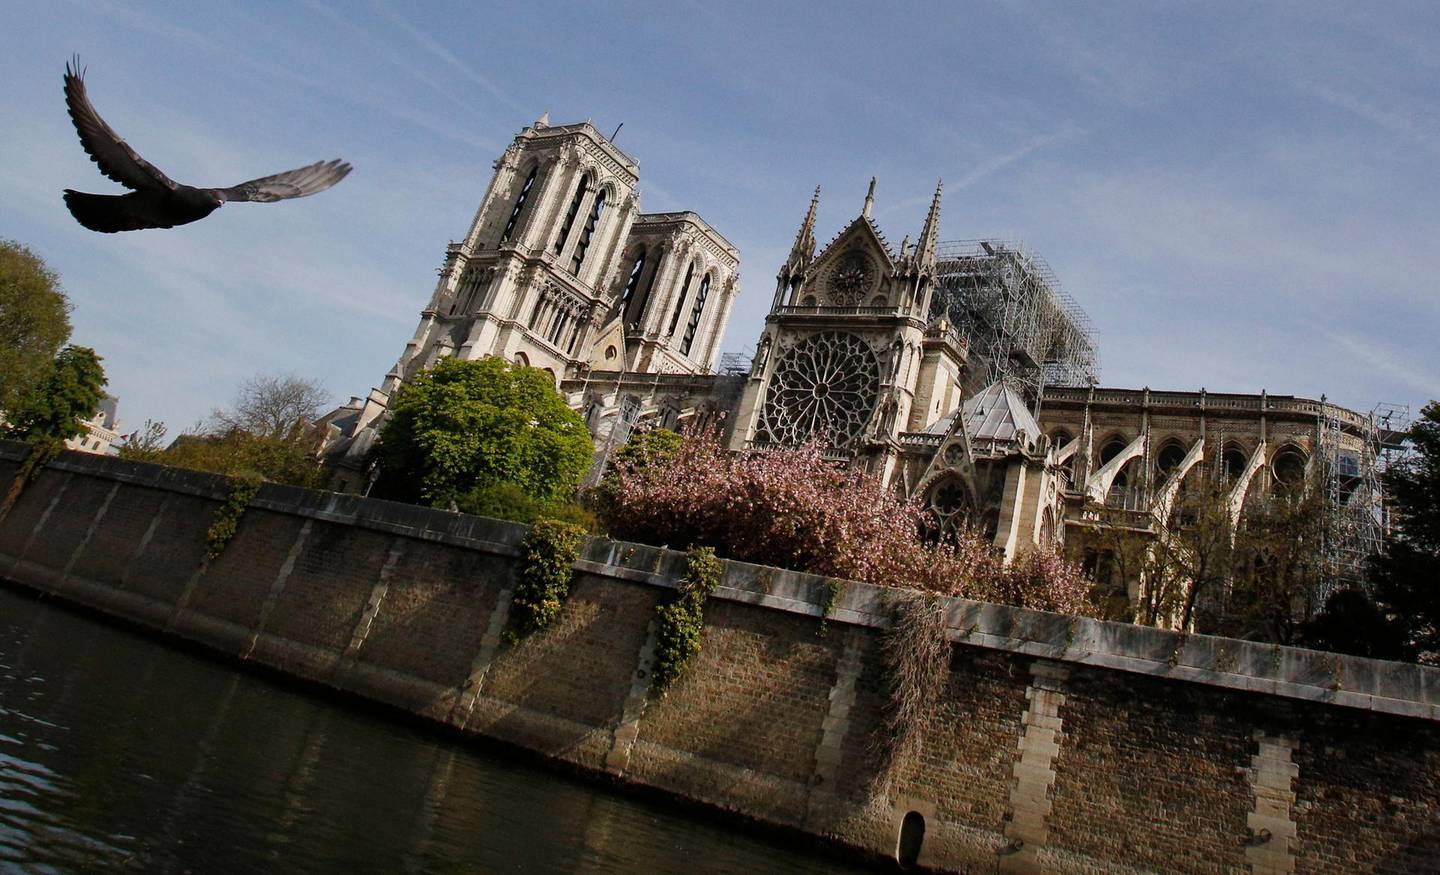 A bird flies past the Notre Dame Cathedral in Paris, Thursday, April 18, 2019. Nearly $1 billion has already poured in from ordinary worshippers and high-powered magnates around the world to restore Notre Dame Cathedral in Paris after a massive fire. (AP Photo/Christophe Ena)